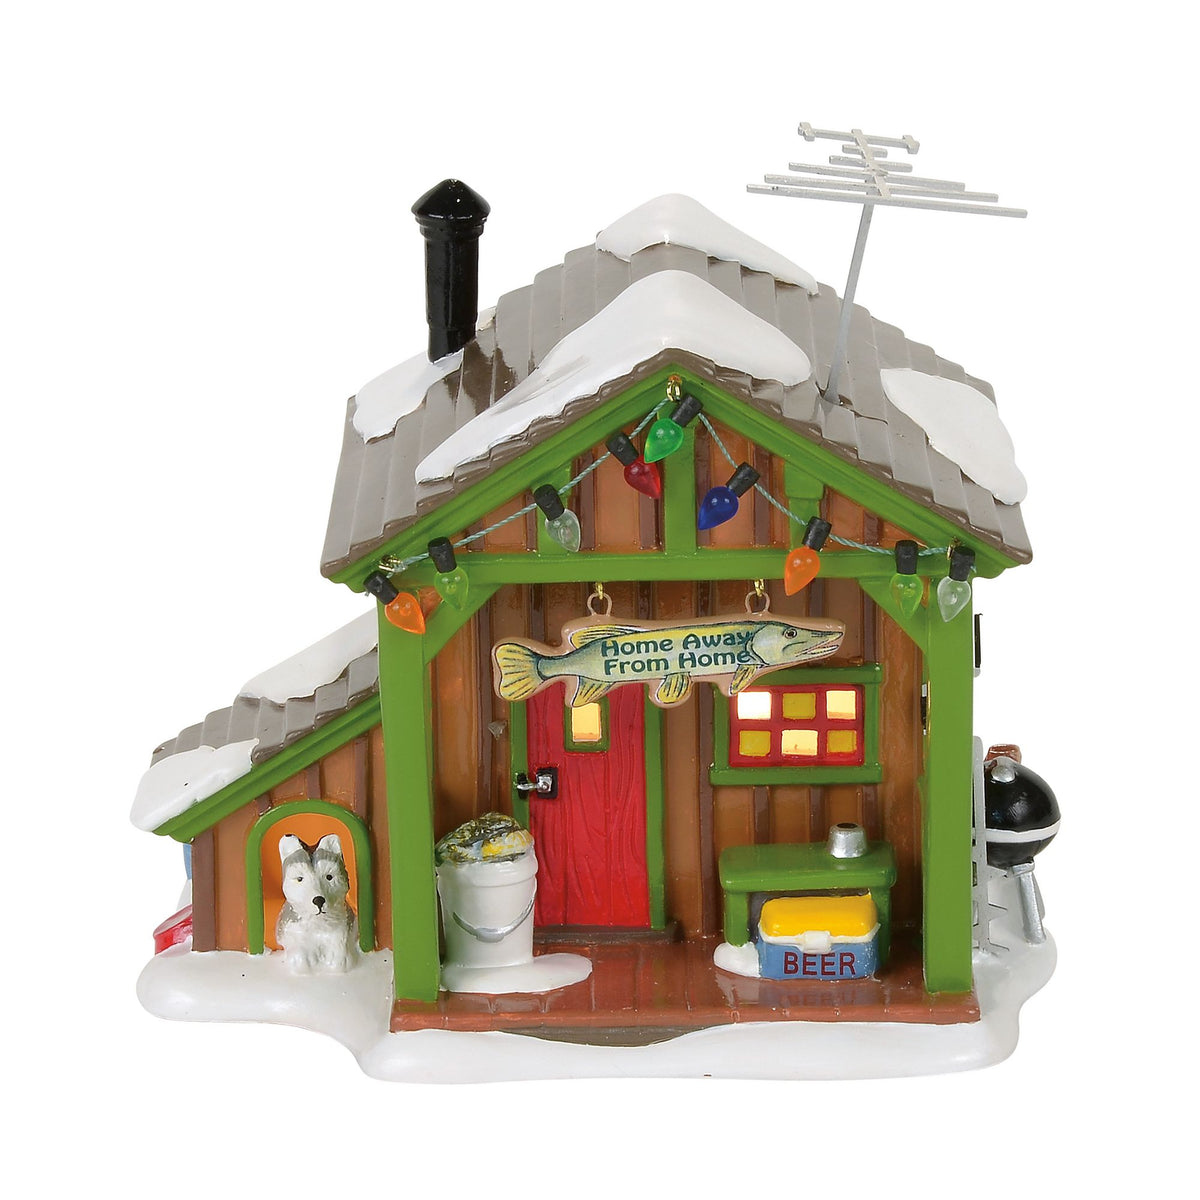 Home Away From Home Fish Shack 4056685 – Department 56 Retirements